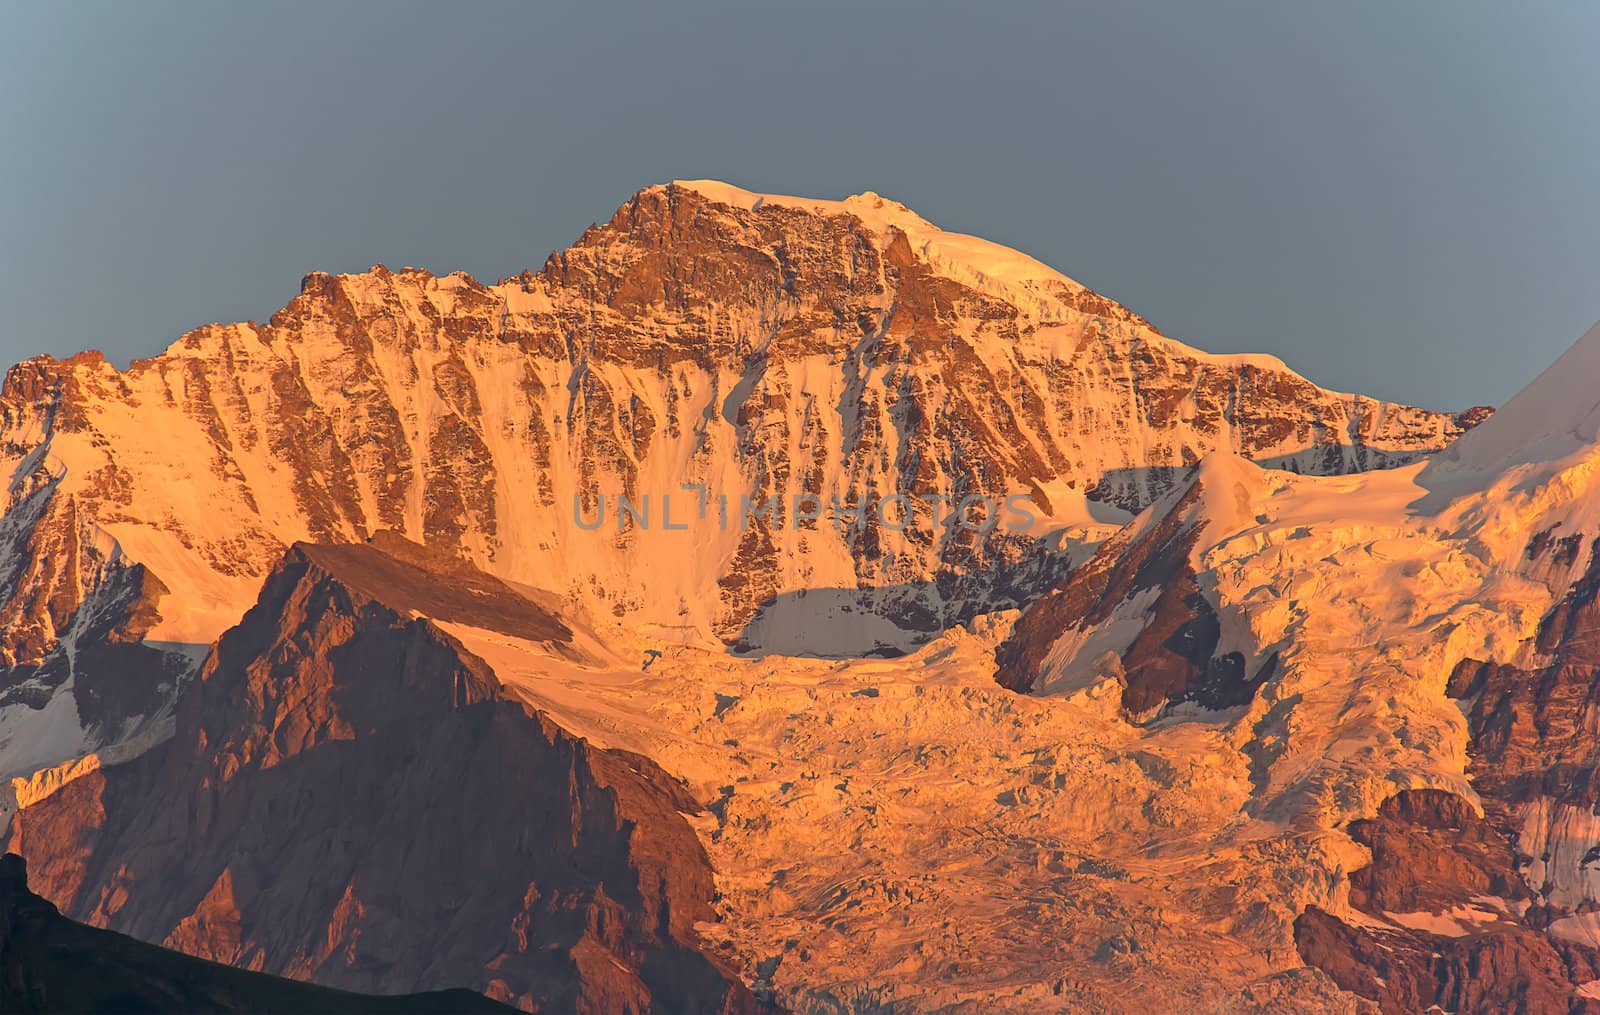 Jungfrau mountain in the swiss alps at the sunset